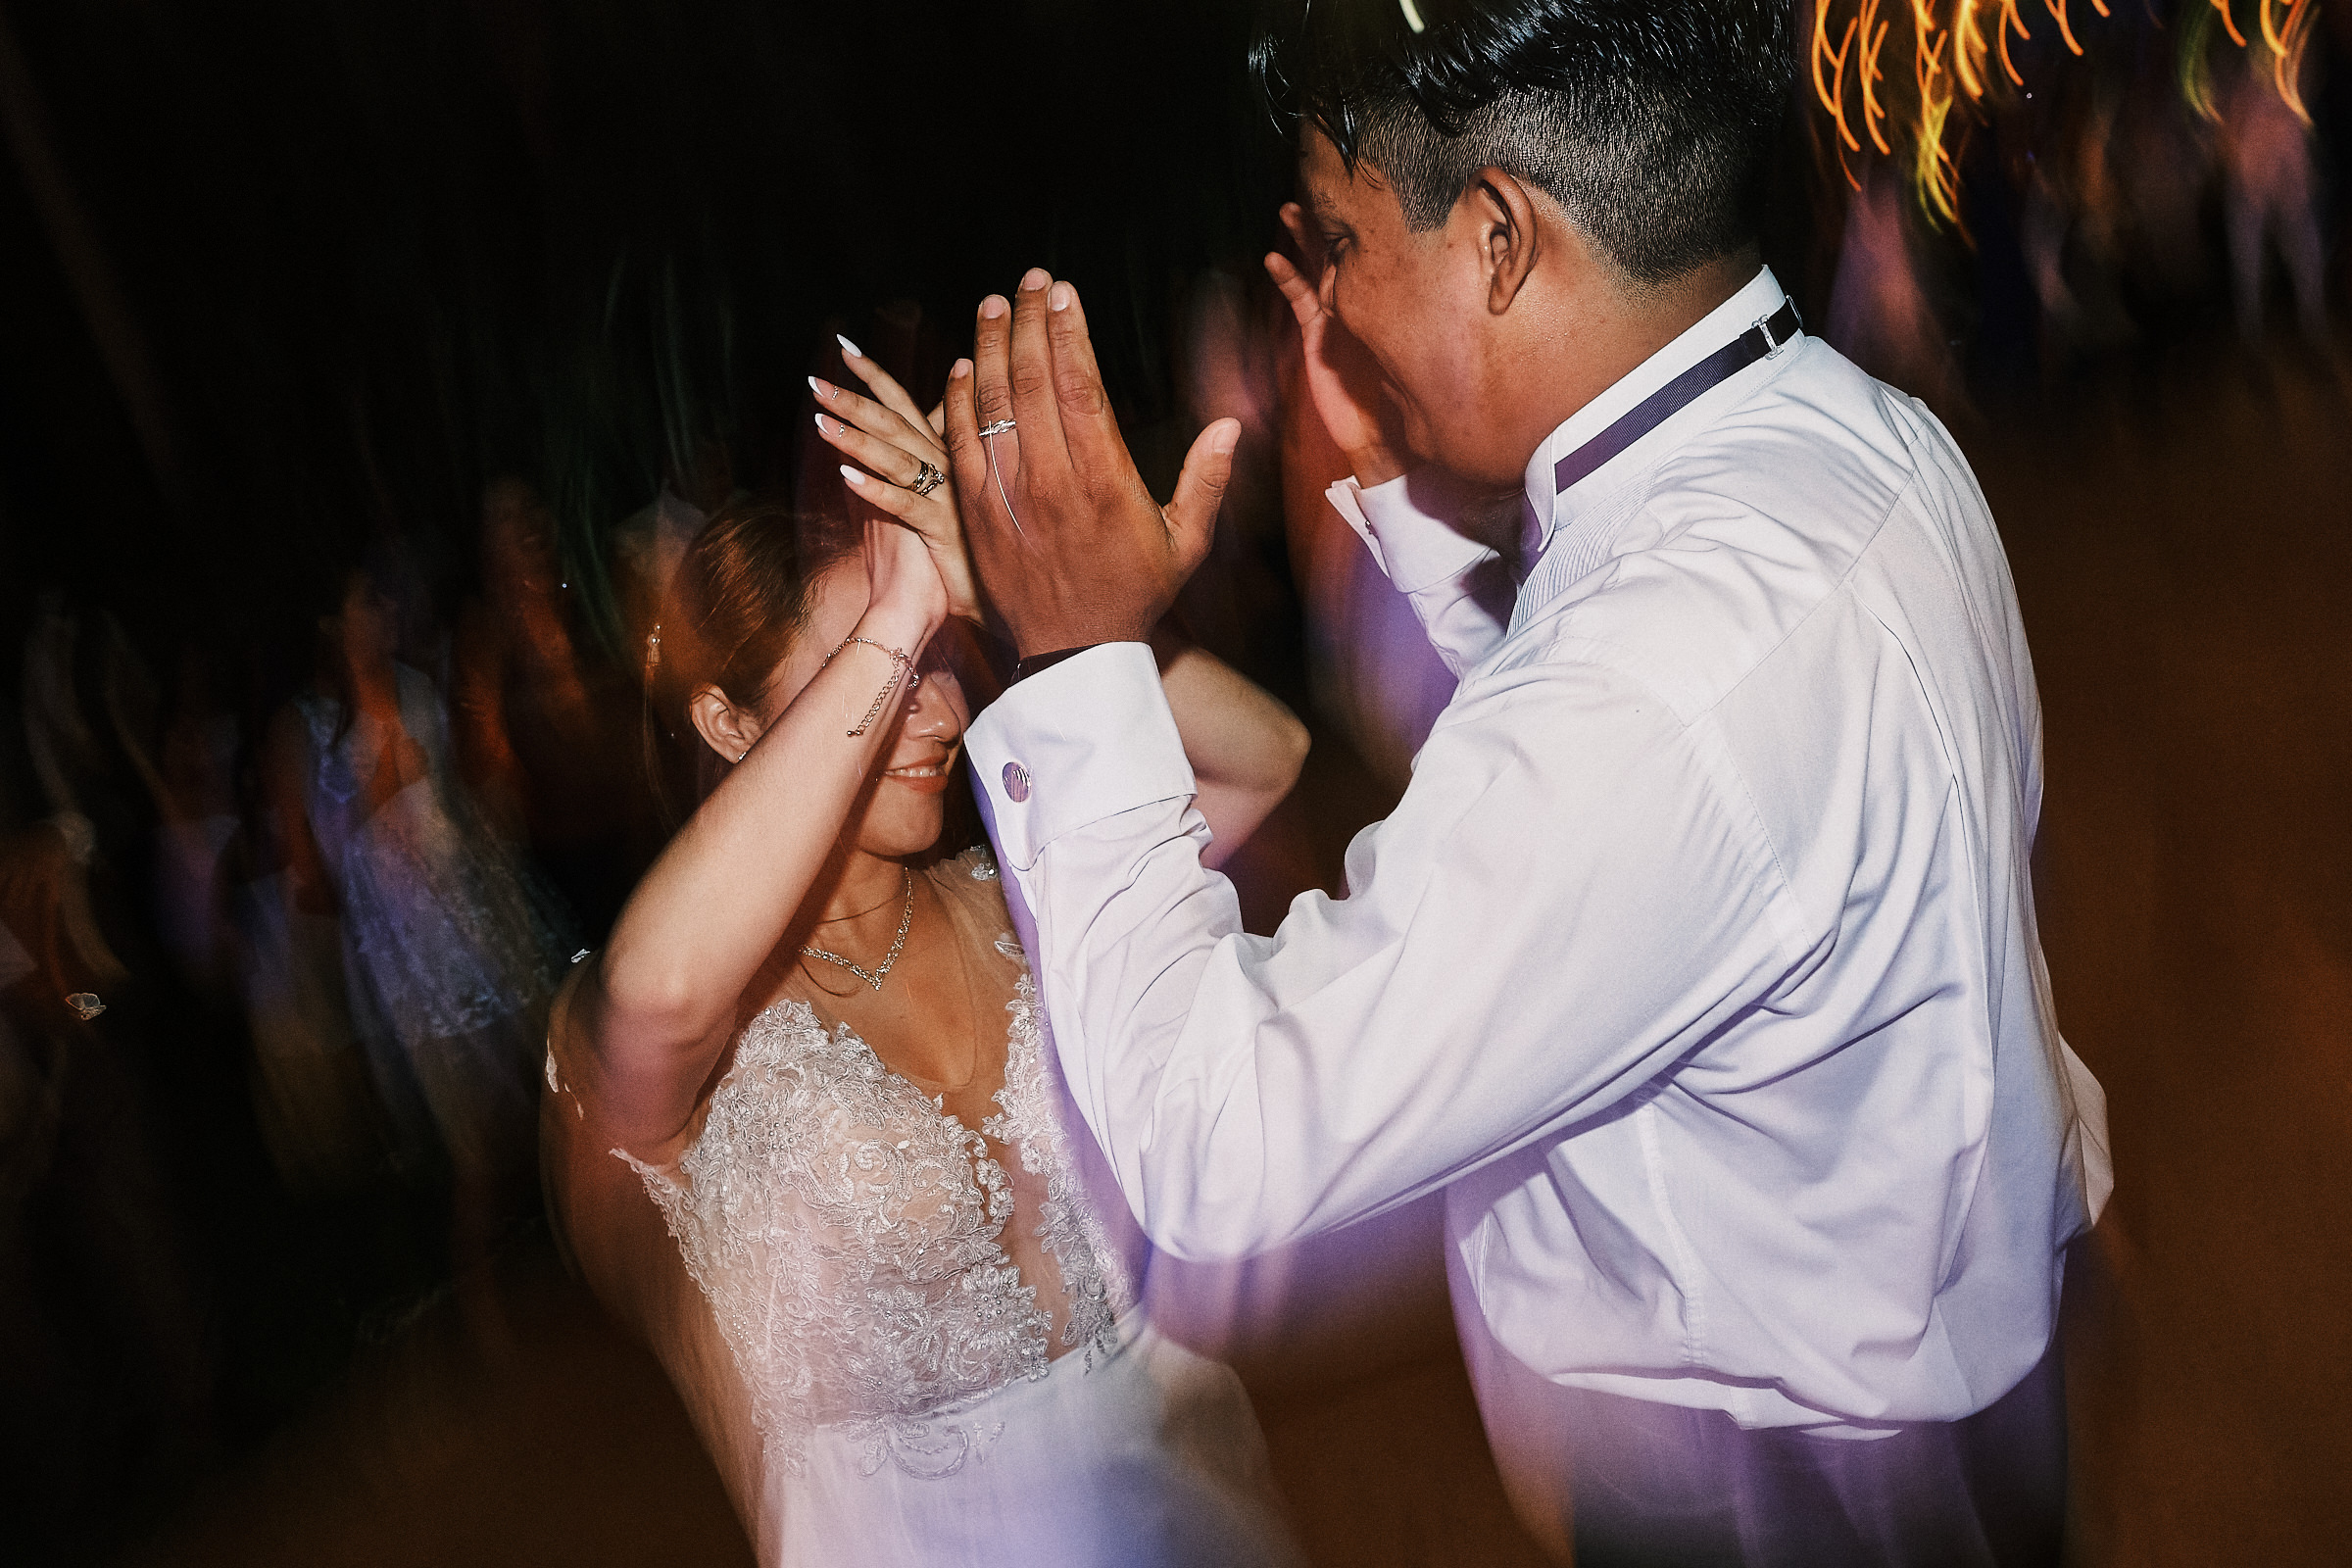 Bride And Groom Dance Together Late In The Evening